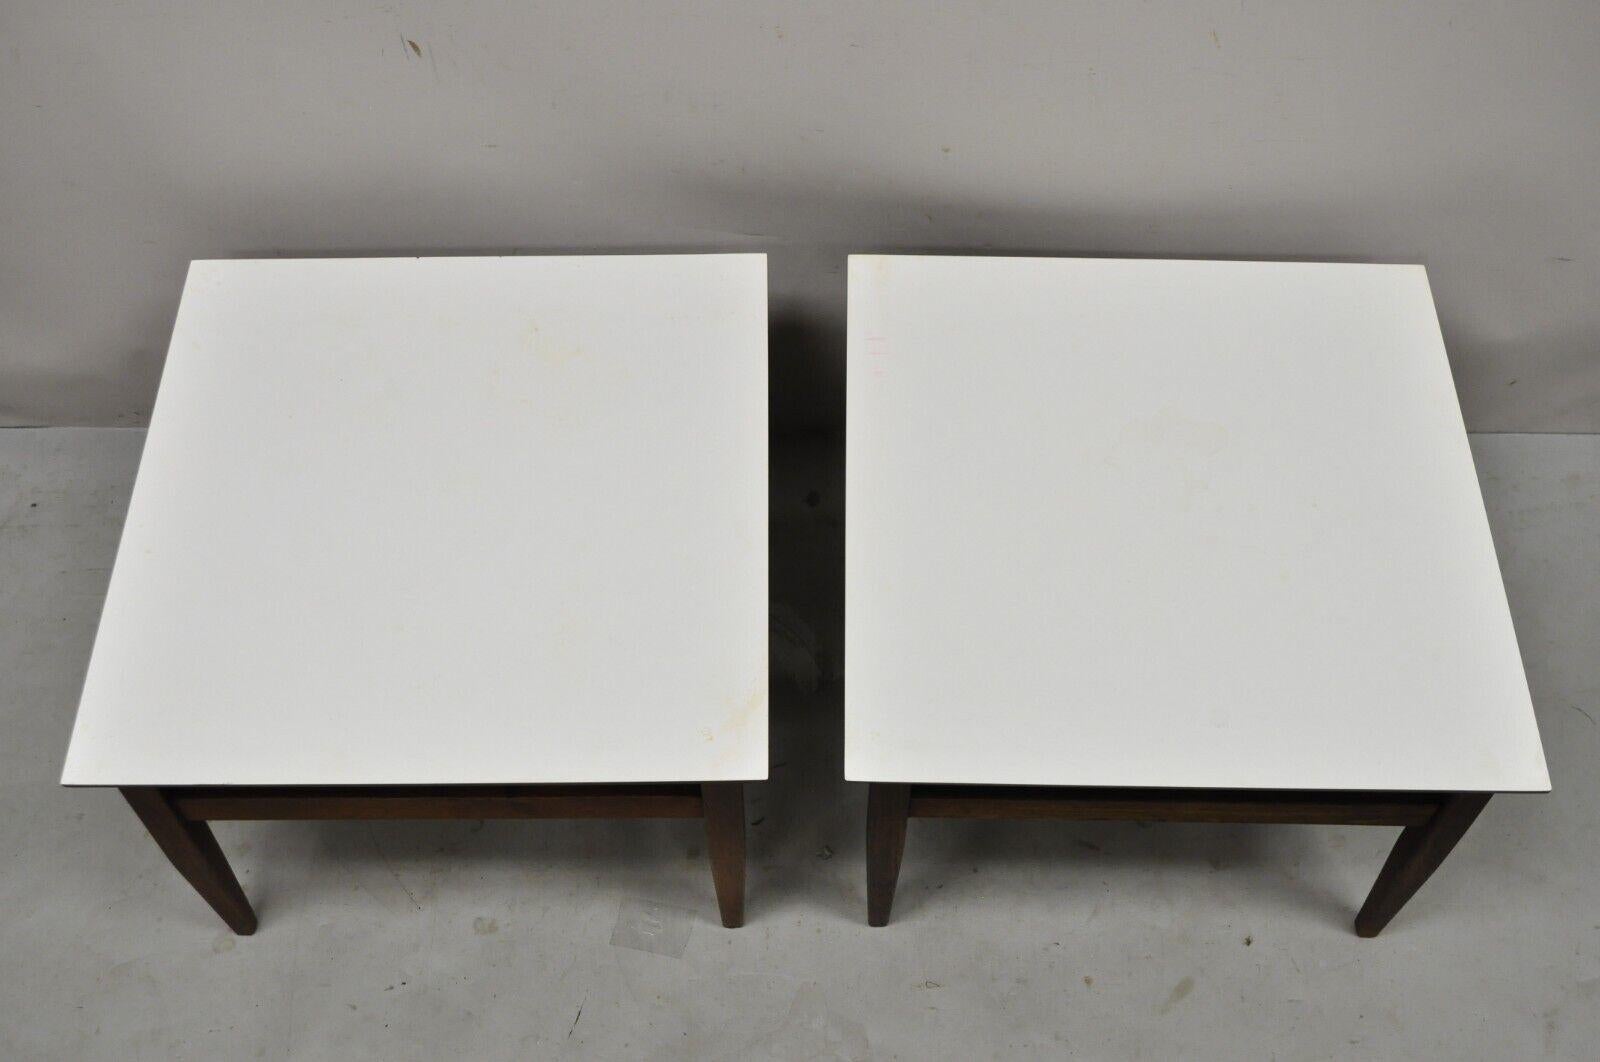 Vintage Mid Century Walnut Base Laminate Top Low Side Tables - a Pair For Sale 4